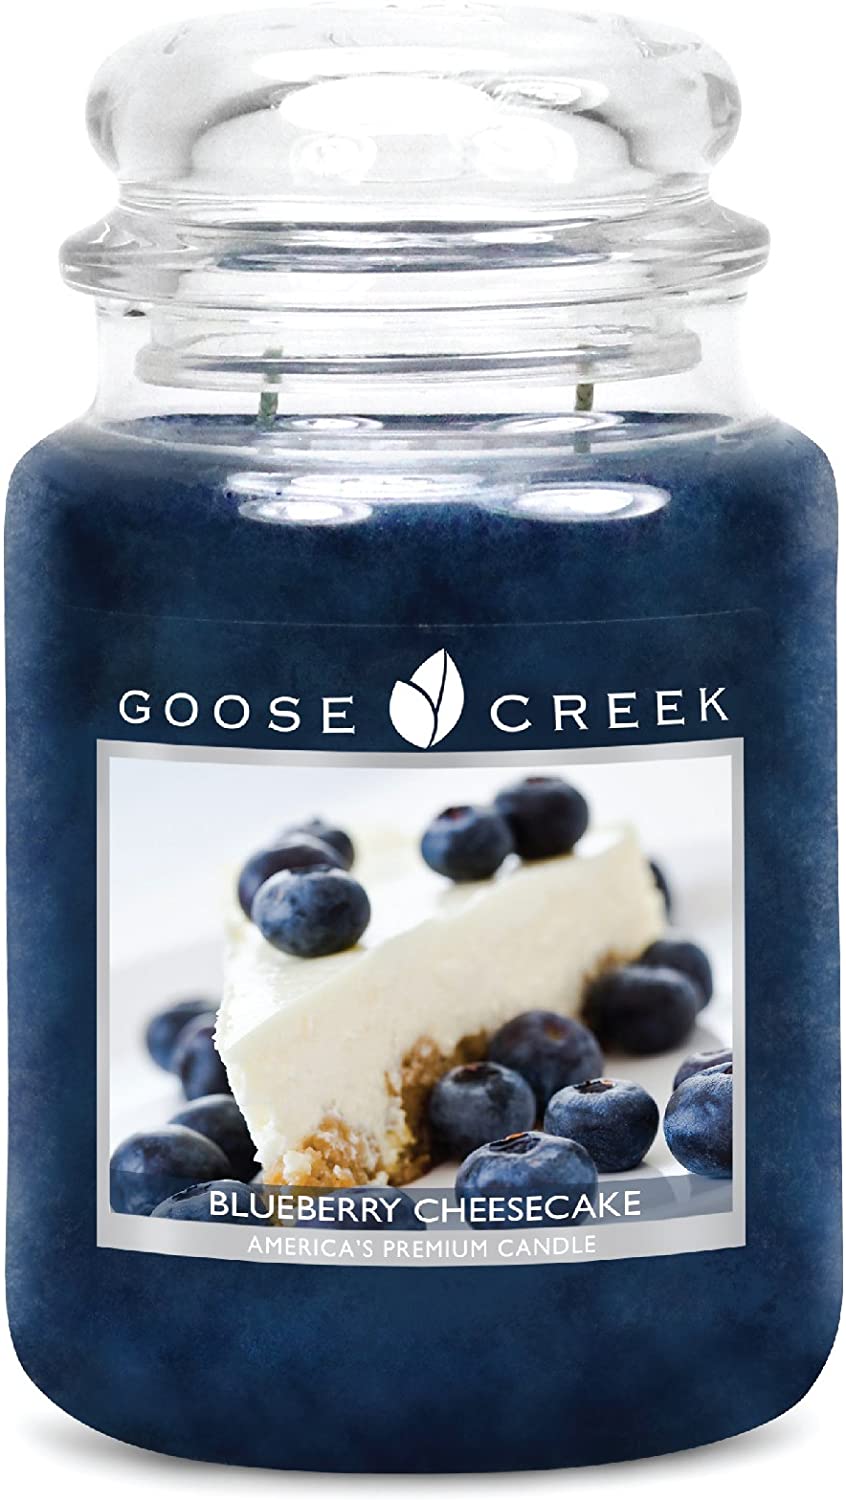 Goose Creek Large Jar Scented Candle, Blueberry Cheesecake 24oz (680g)